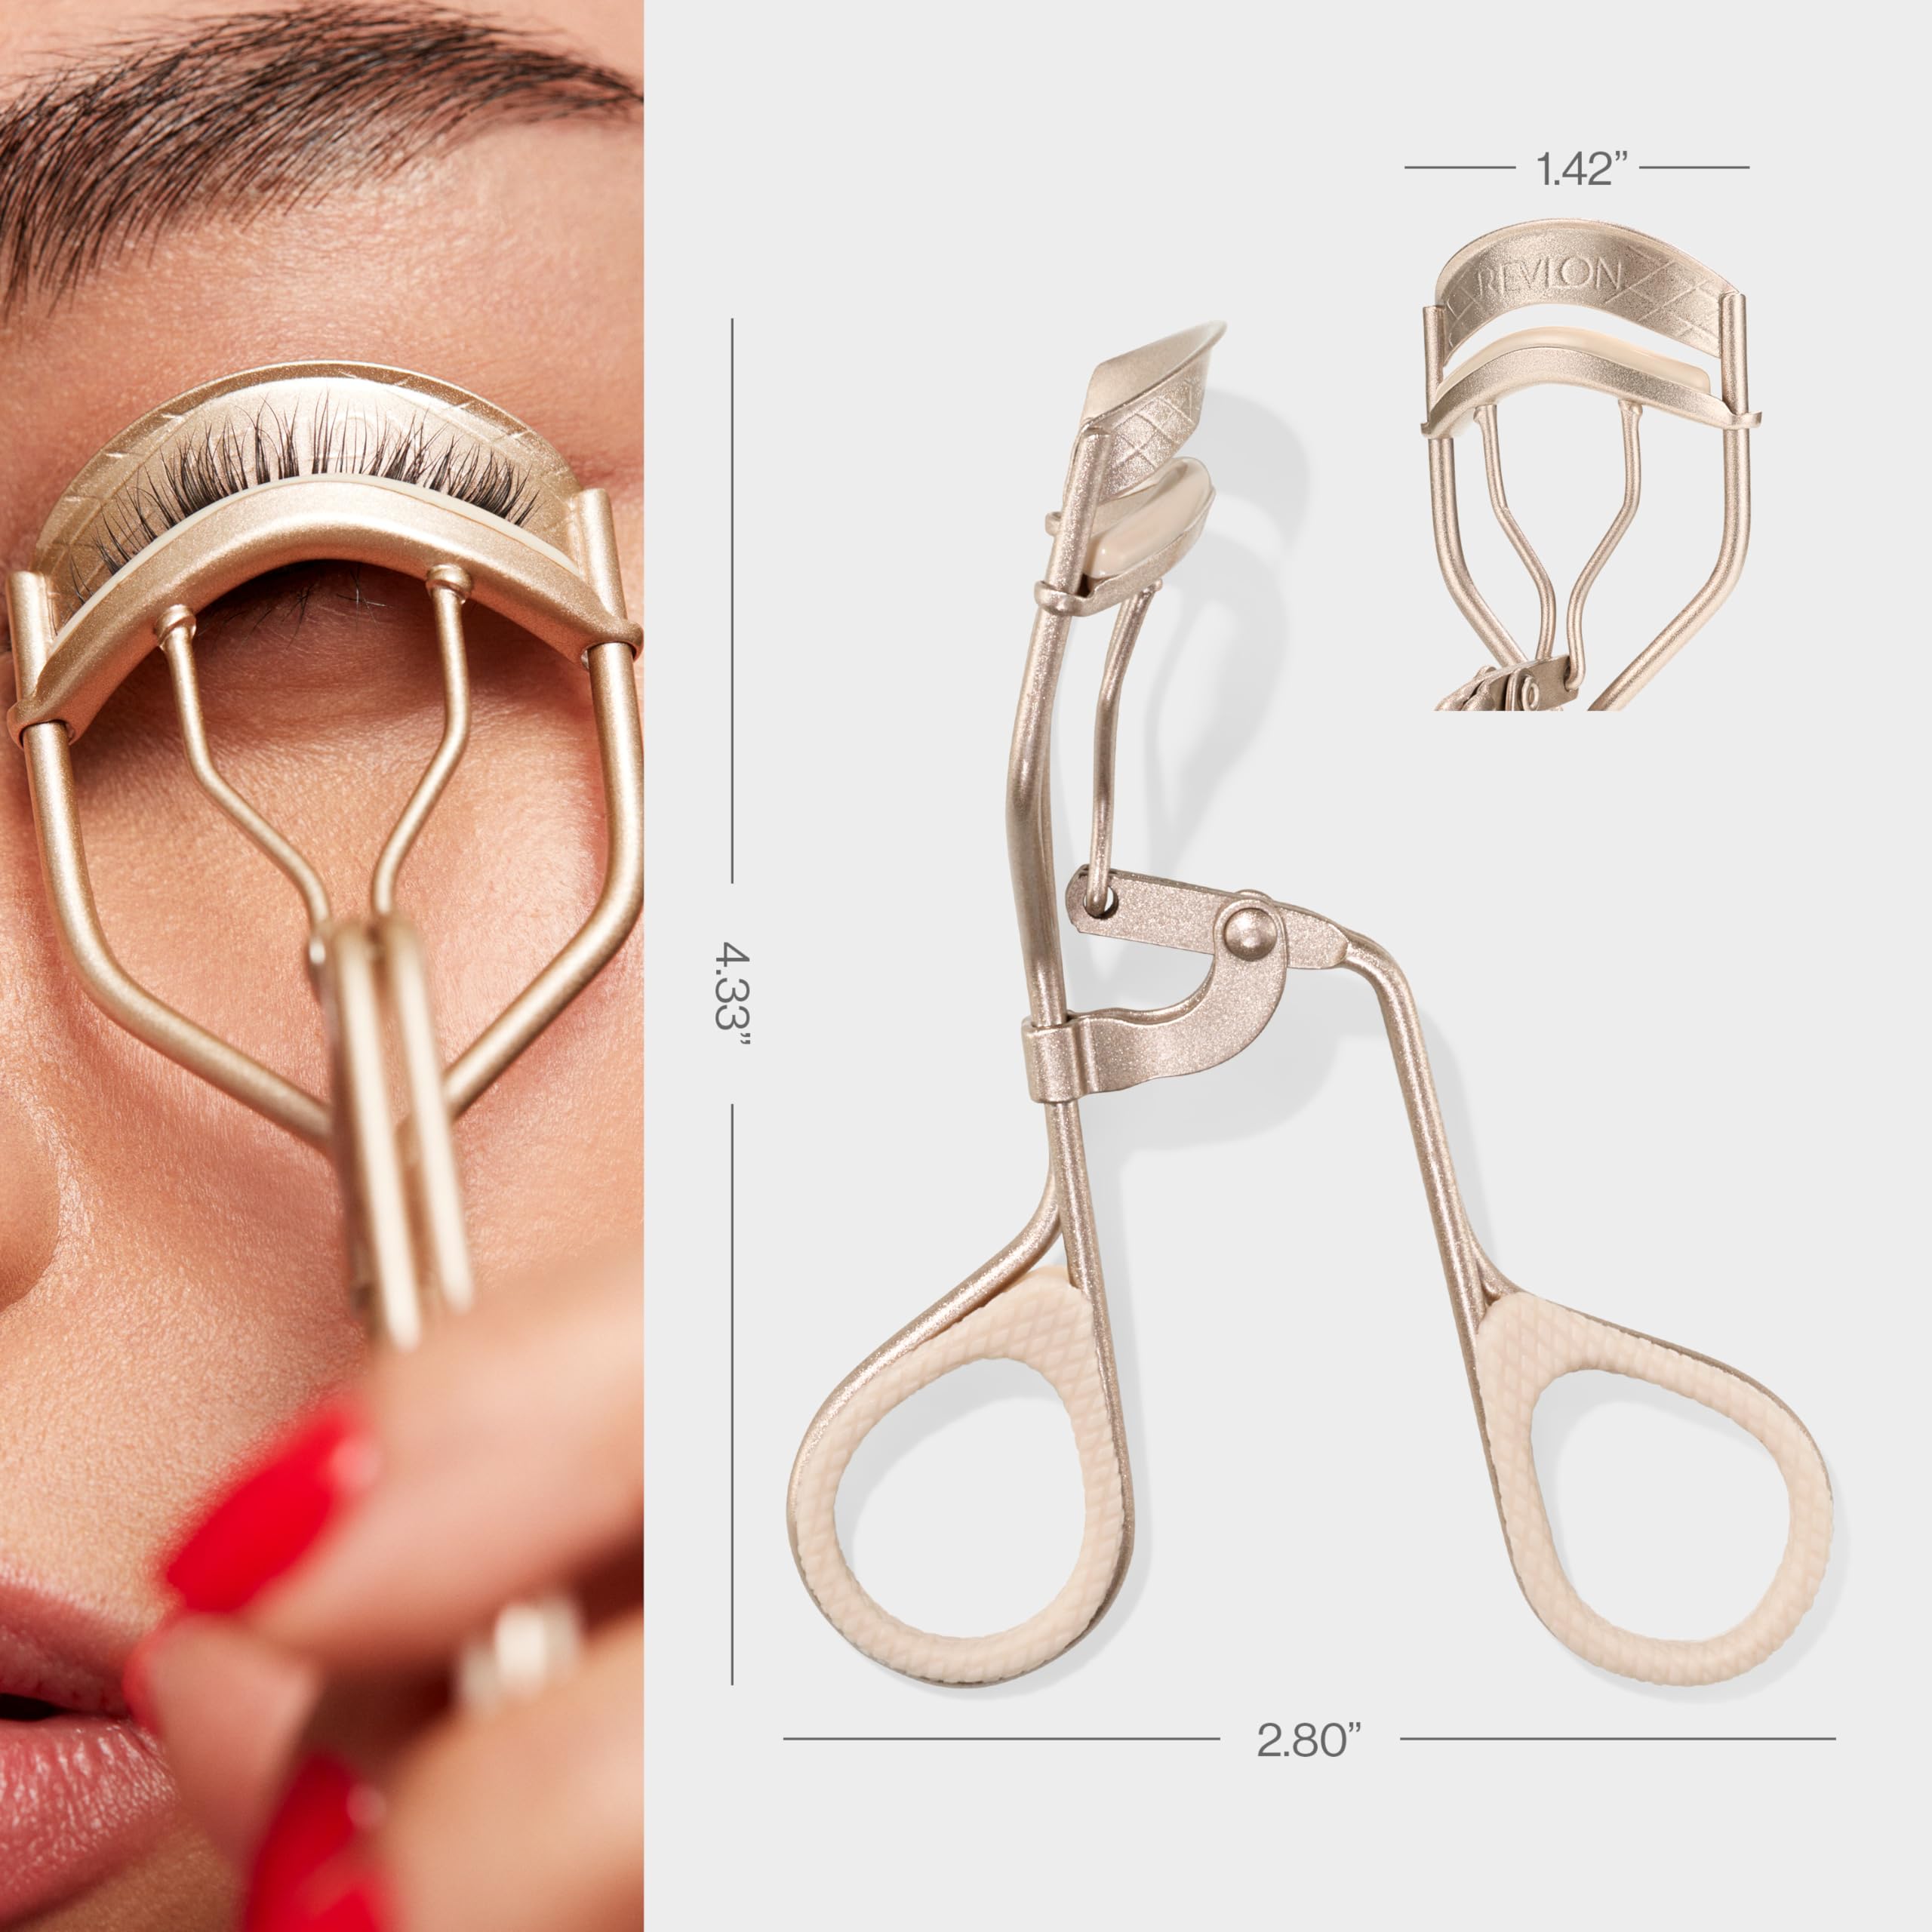 Revlon Designer Series Lash Curler, Eyelash Lift for an Eye Opening Look, with Finger Grips for a Non Slip Grip, Easy to Use, 1 Count